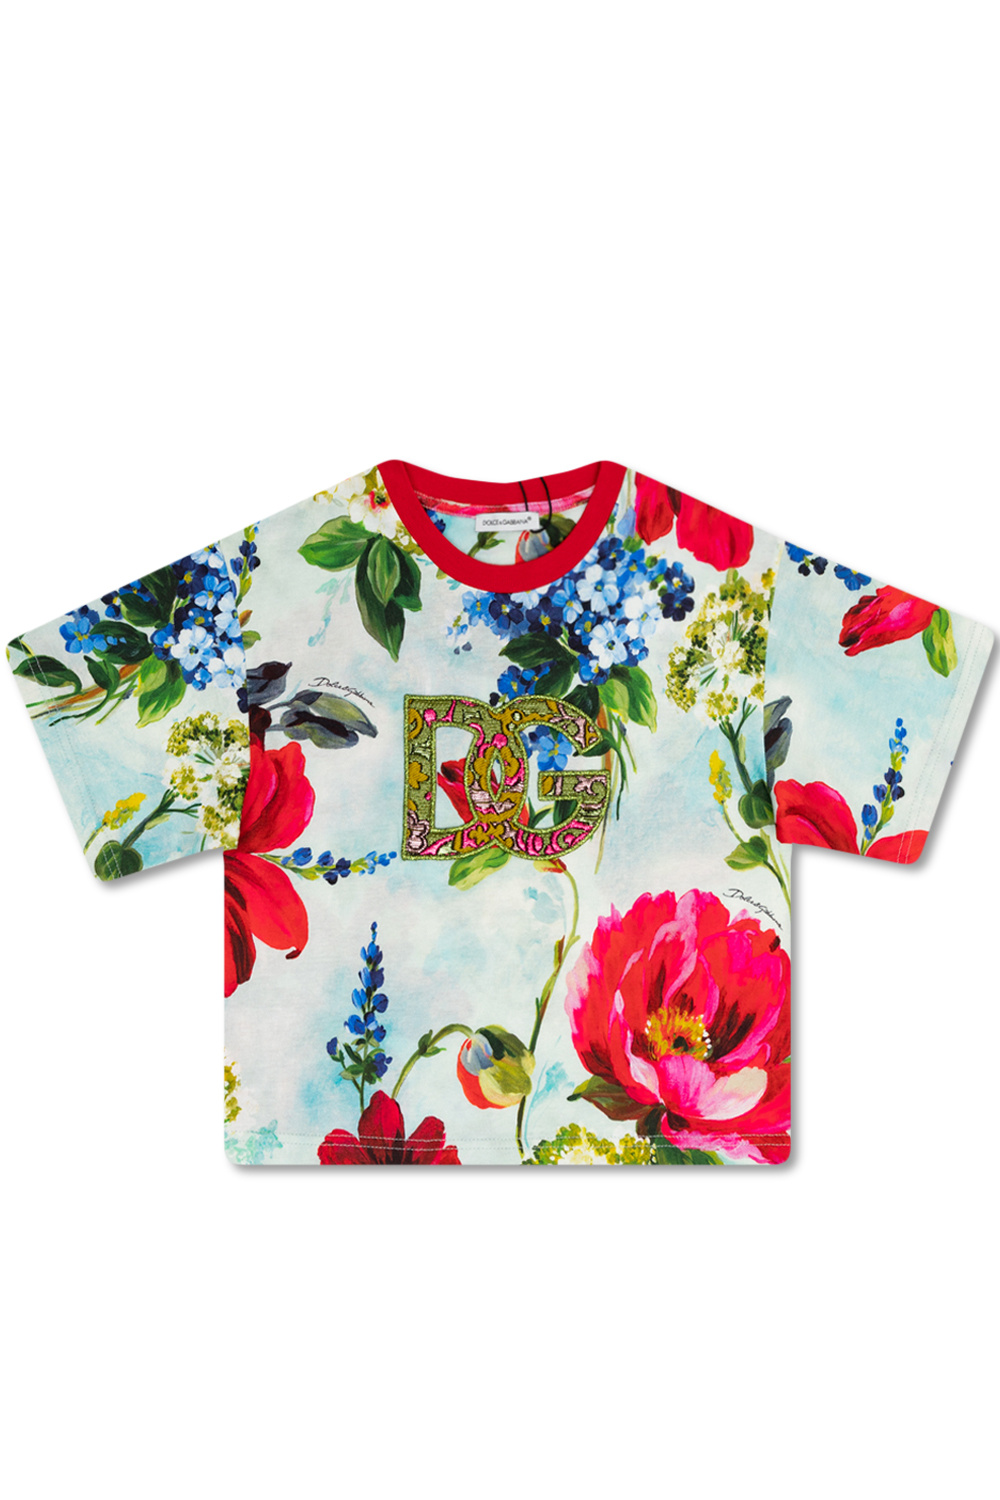 dolce gabbana knotted detail sandals item T-shirt with floral motif